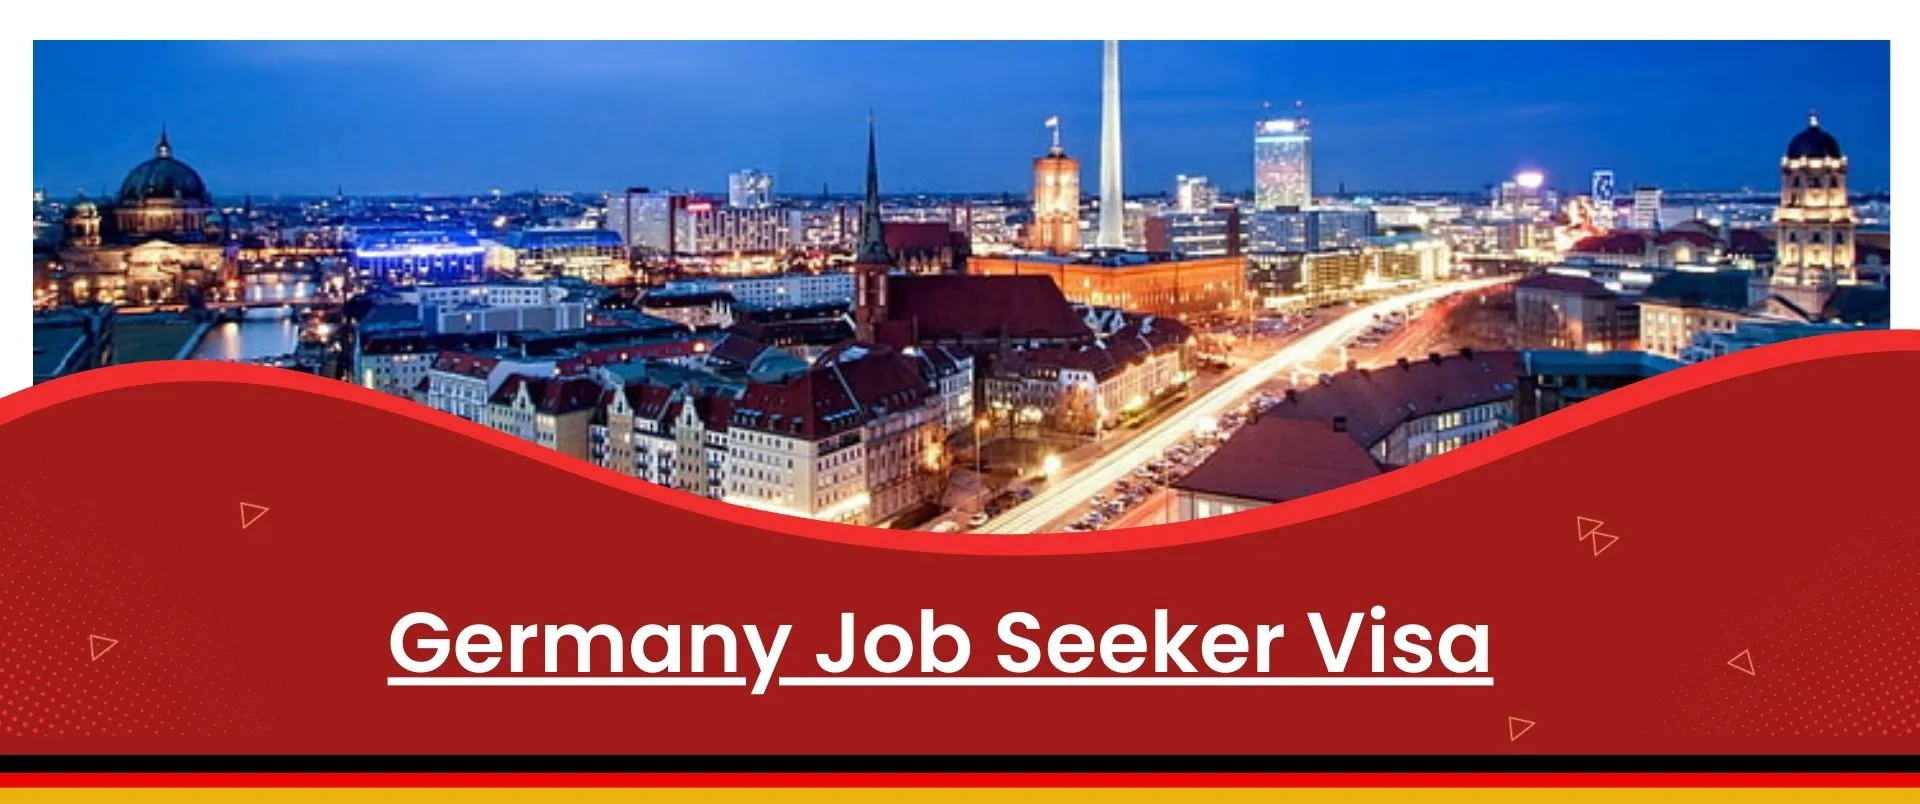 Germany Job seeker visa, Germany City at night time with buildings and vehicles